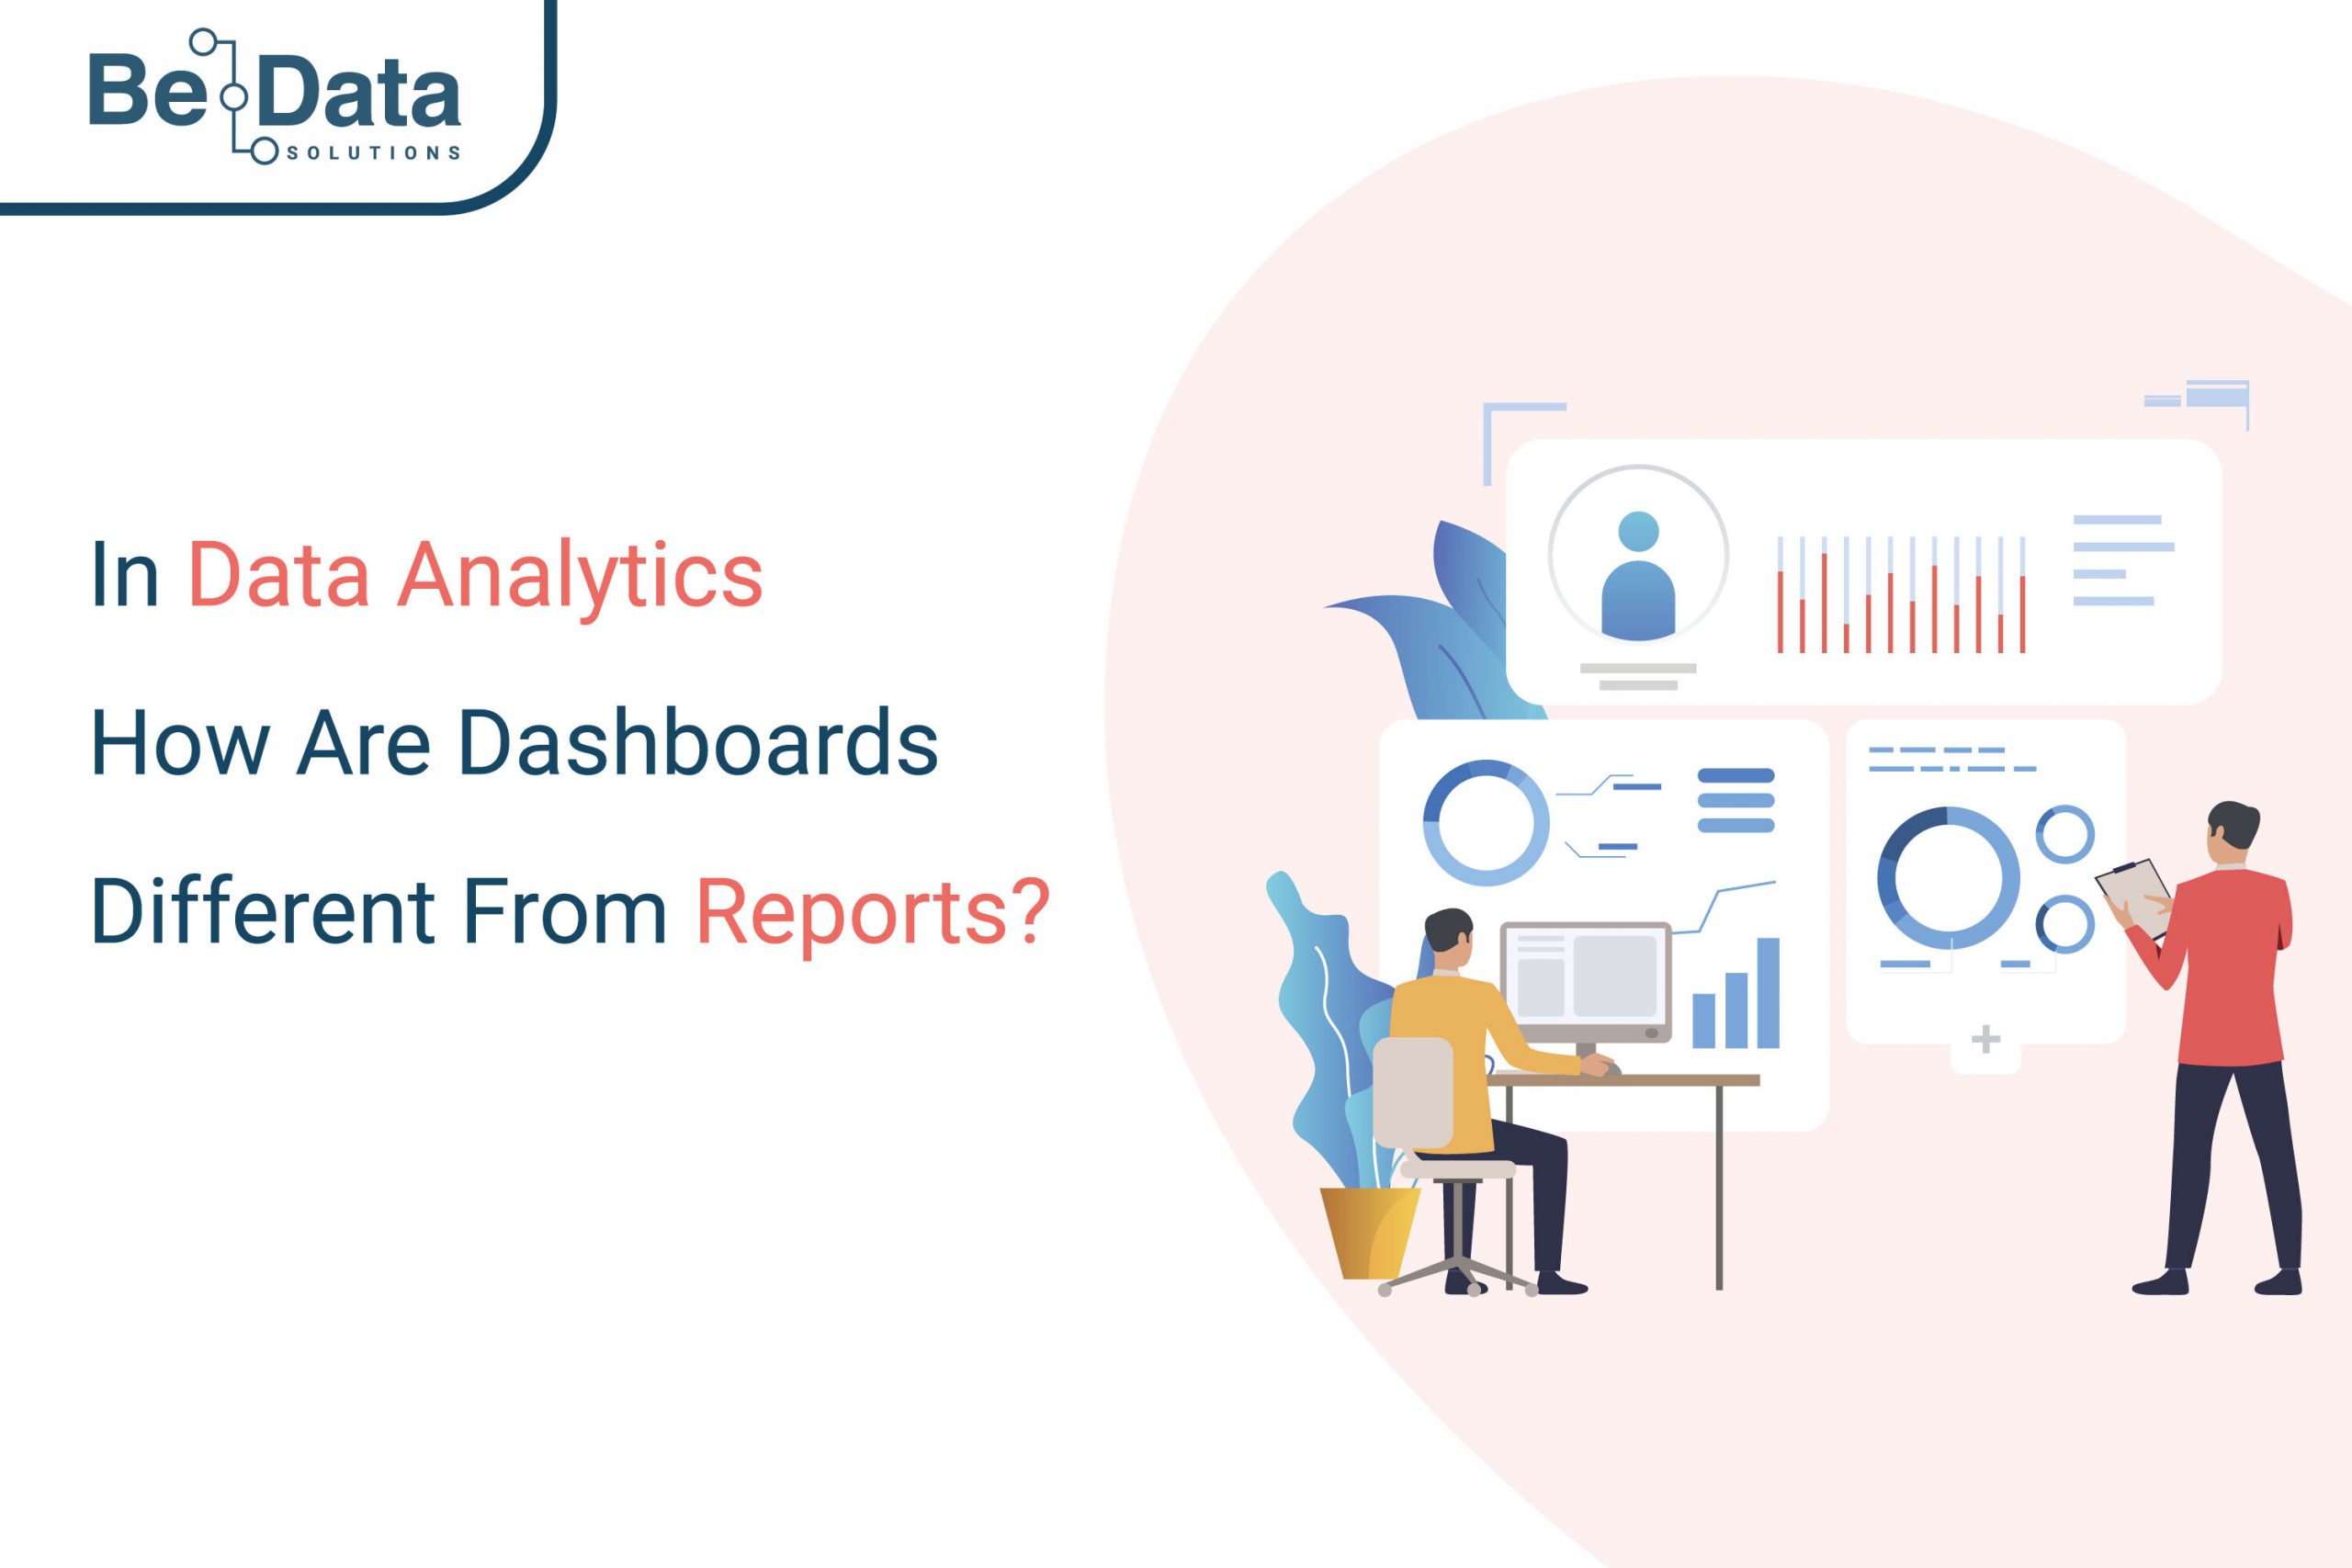 In Data Analytics How Are Dashboards Different From Reports?